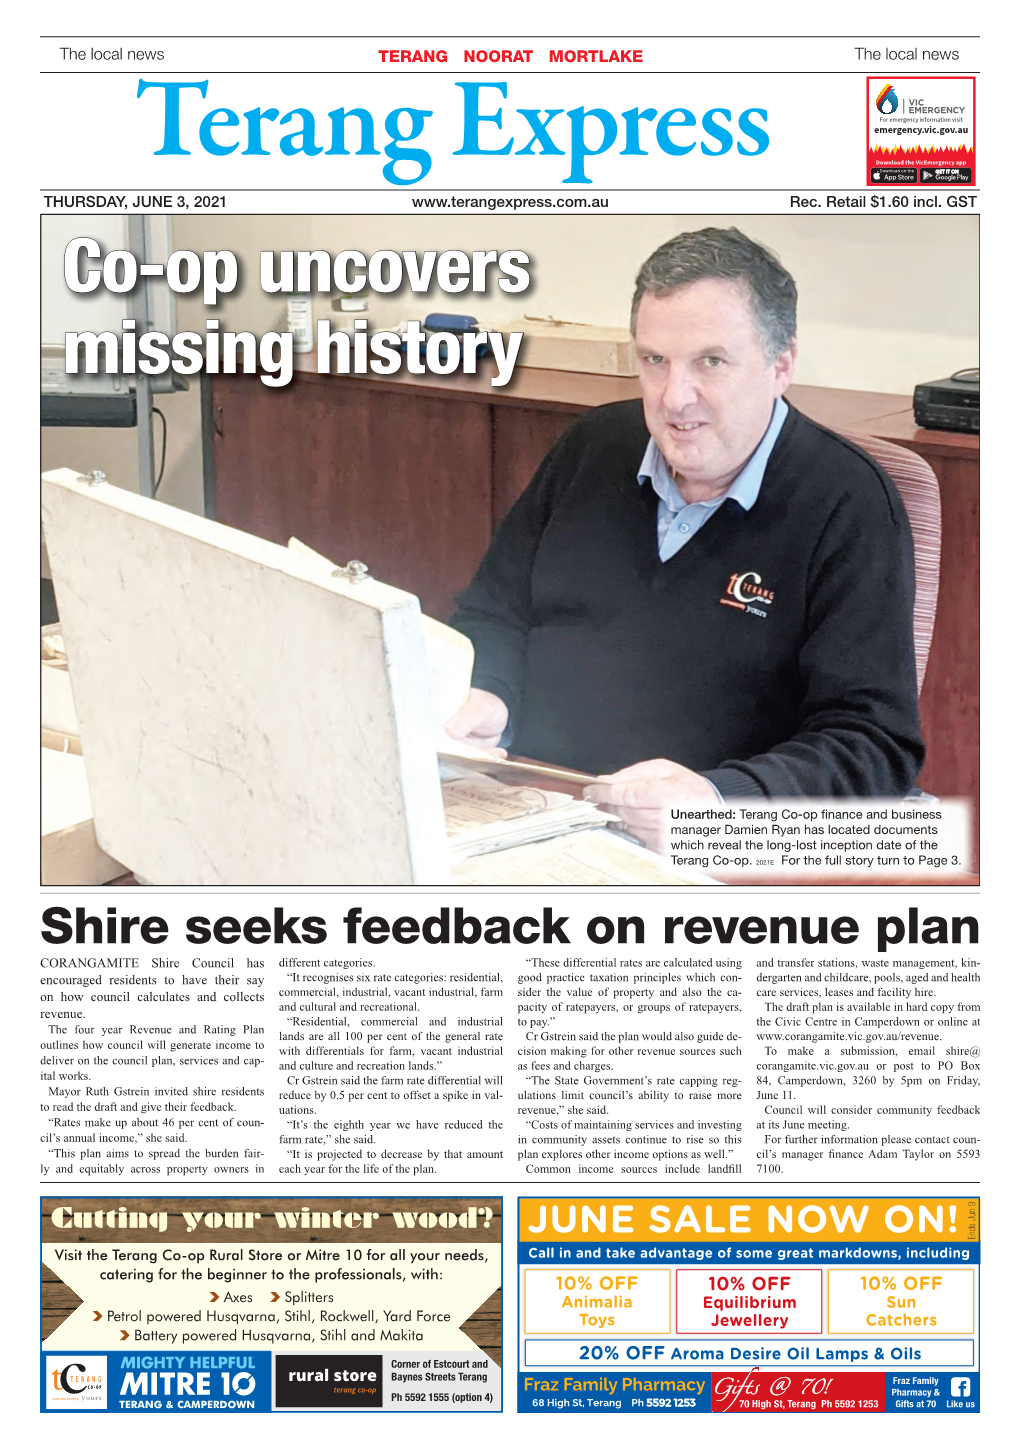 Co-Op Uncovers Missing History